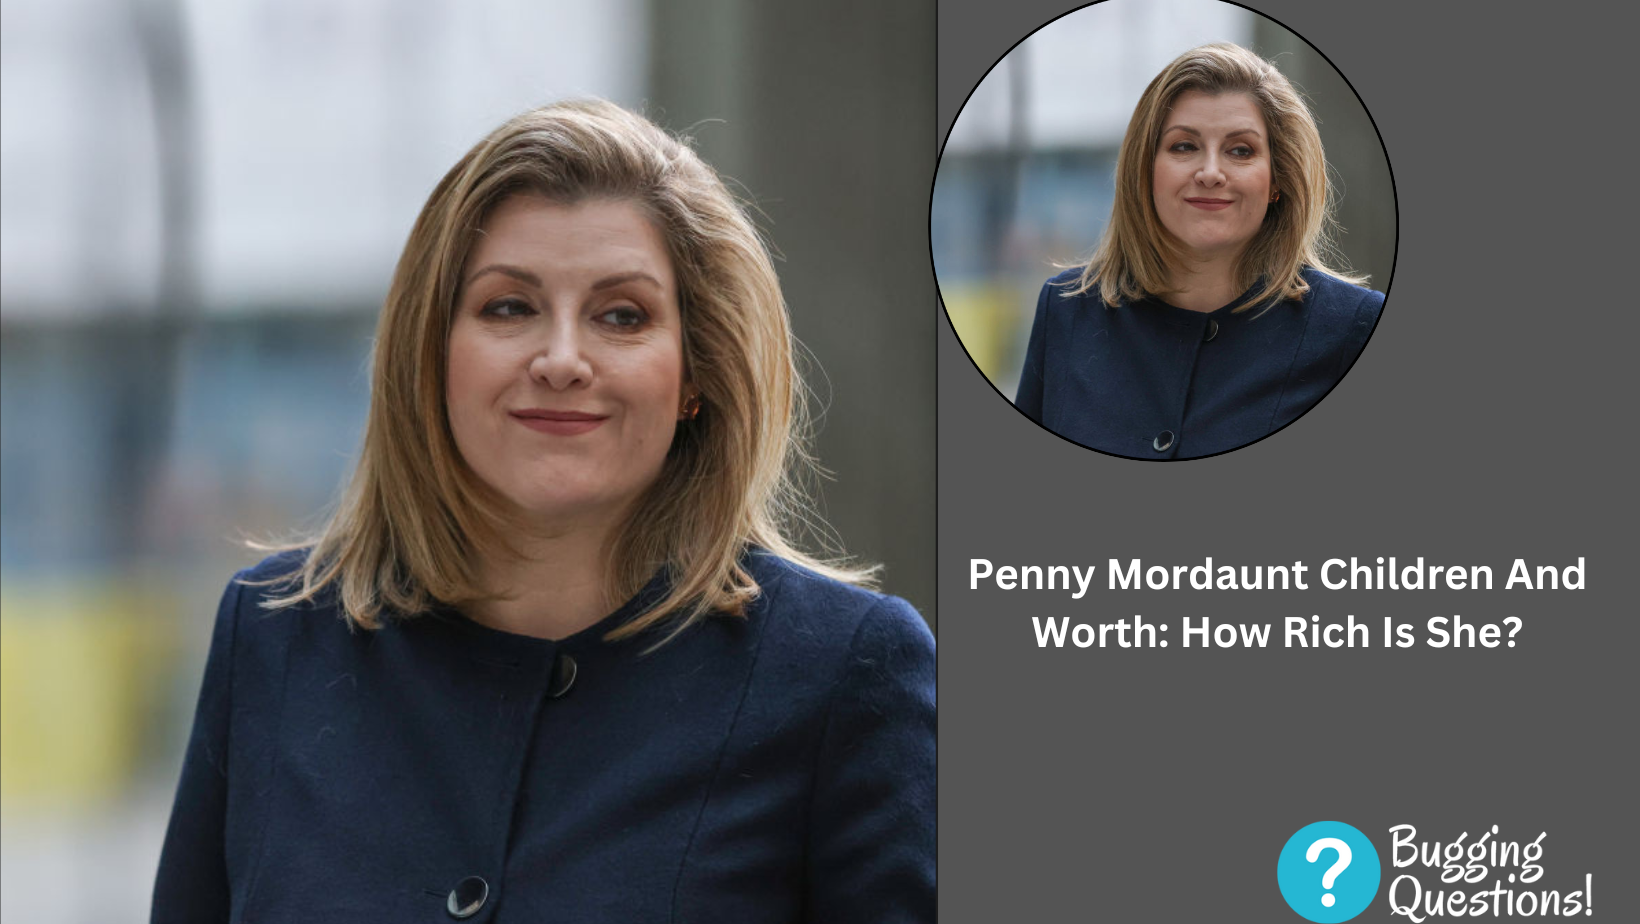 Penny Mordaunt Children And Worth